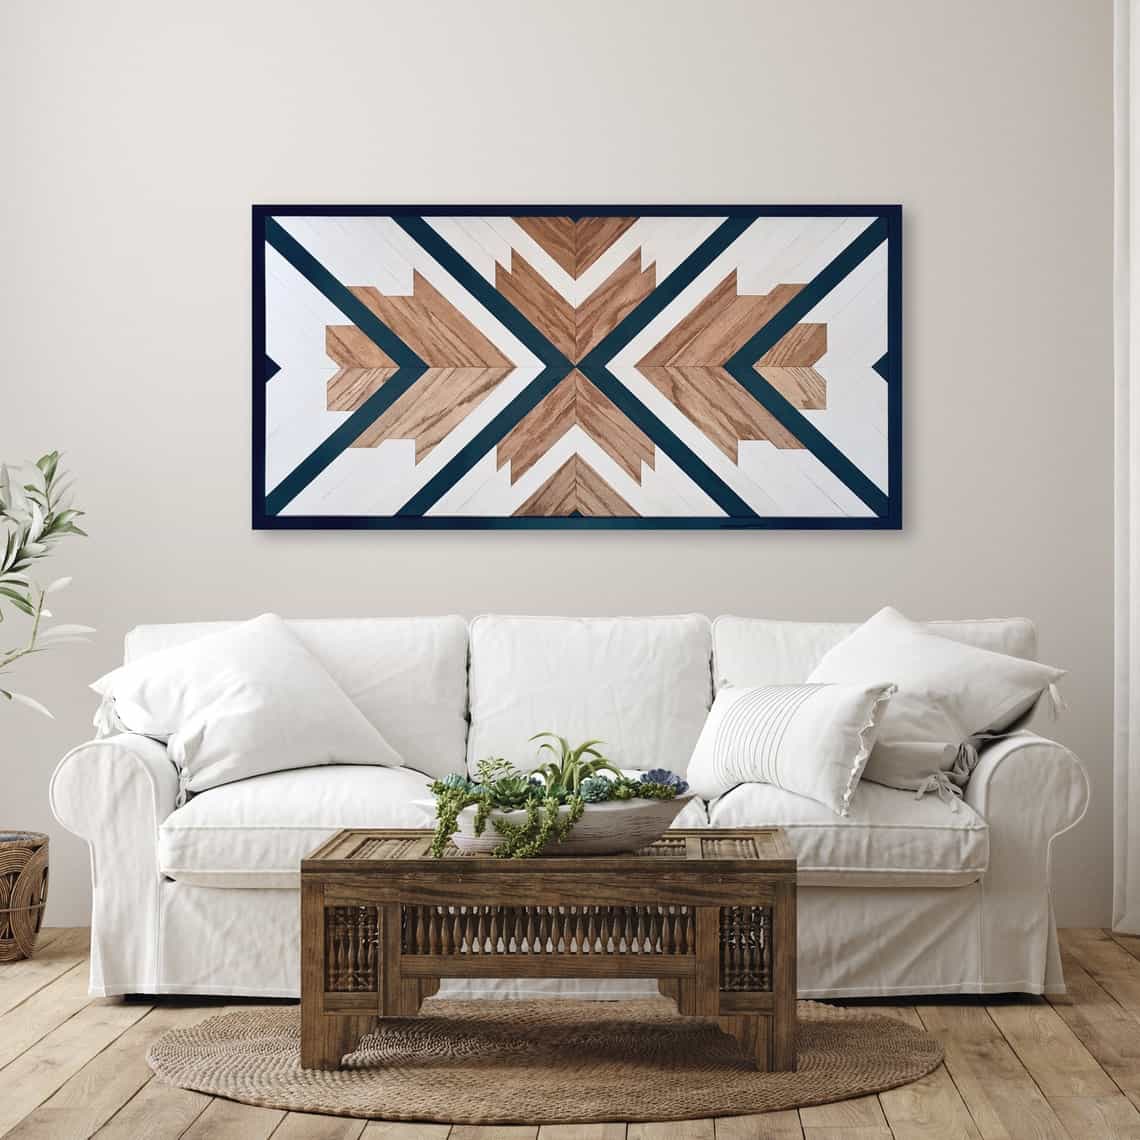 Modern geometric wood wall art with navy accents on neutral painted wall in a living room above the couch.